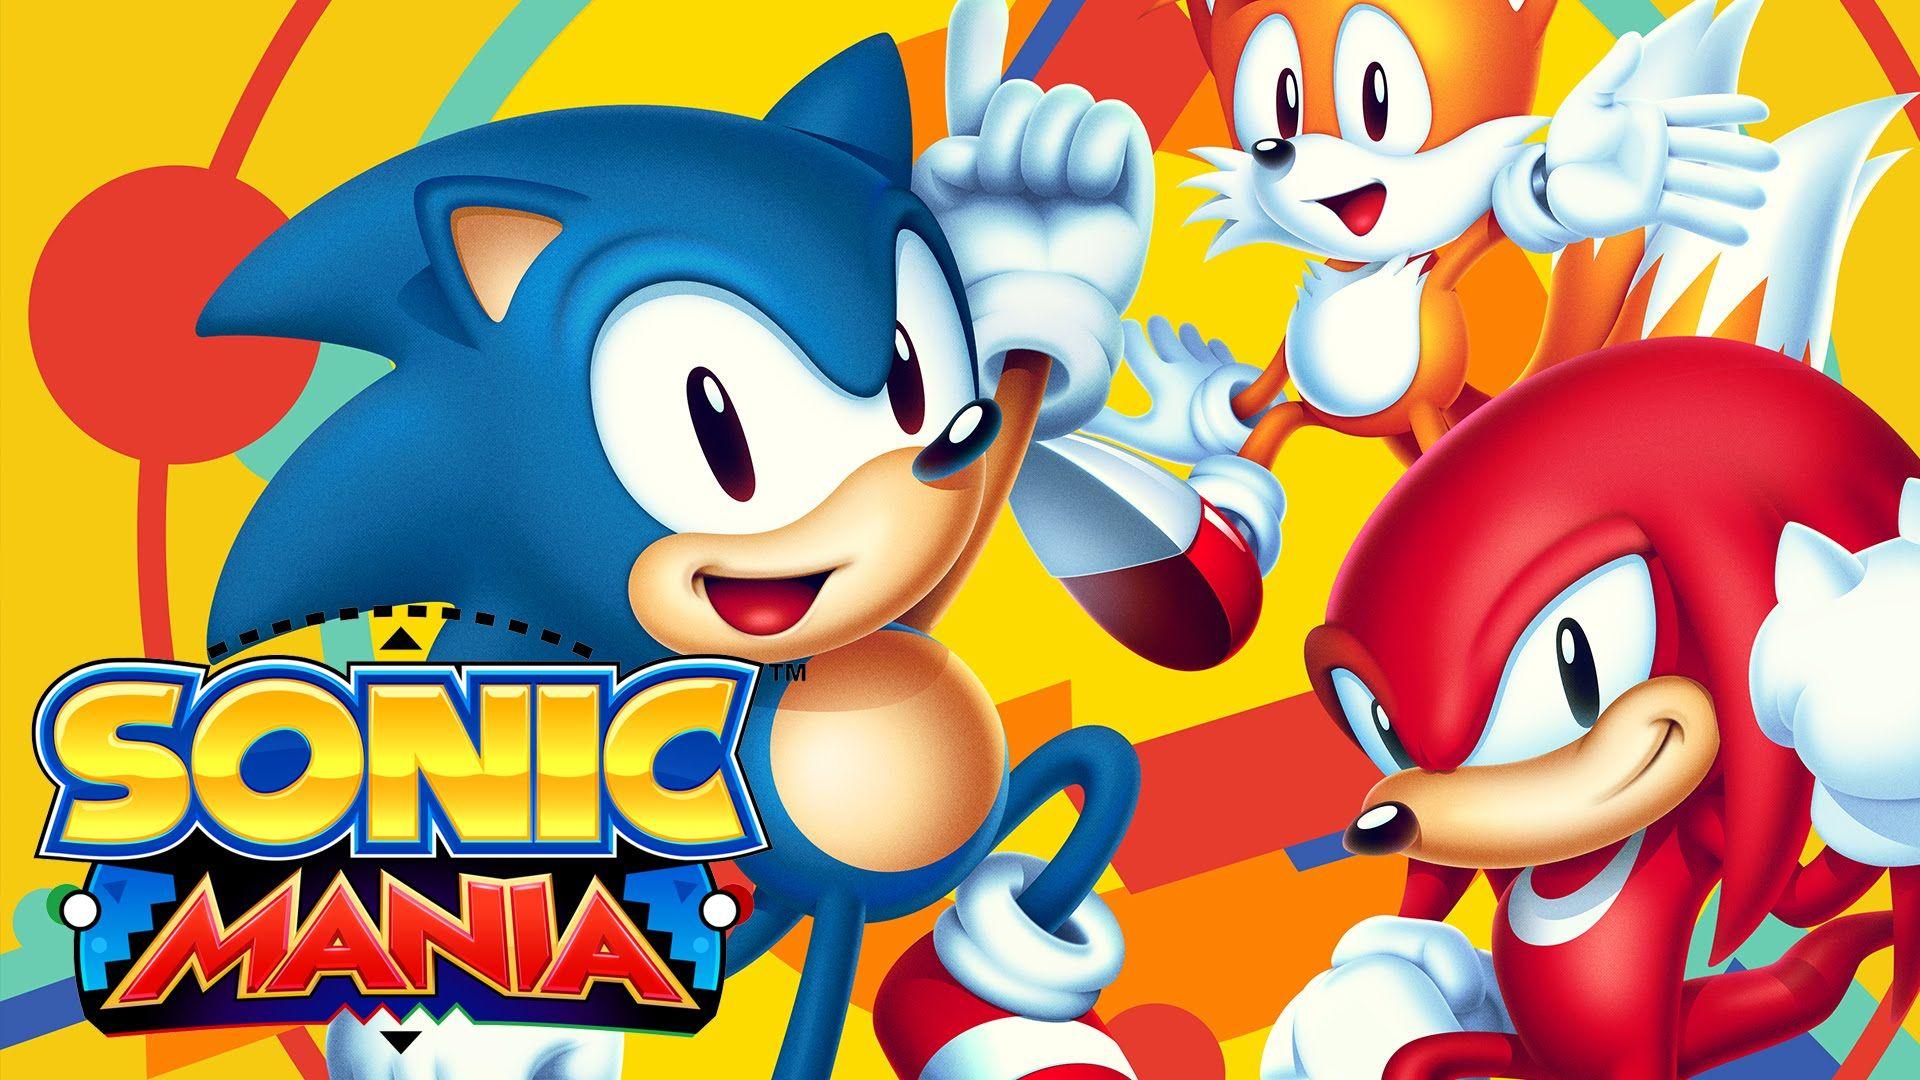 does sonic mania have steam workshop